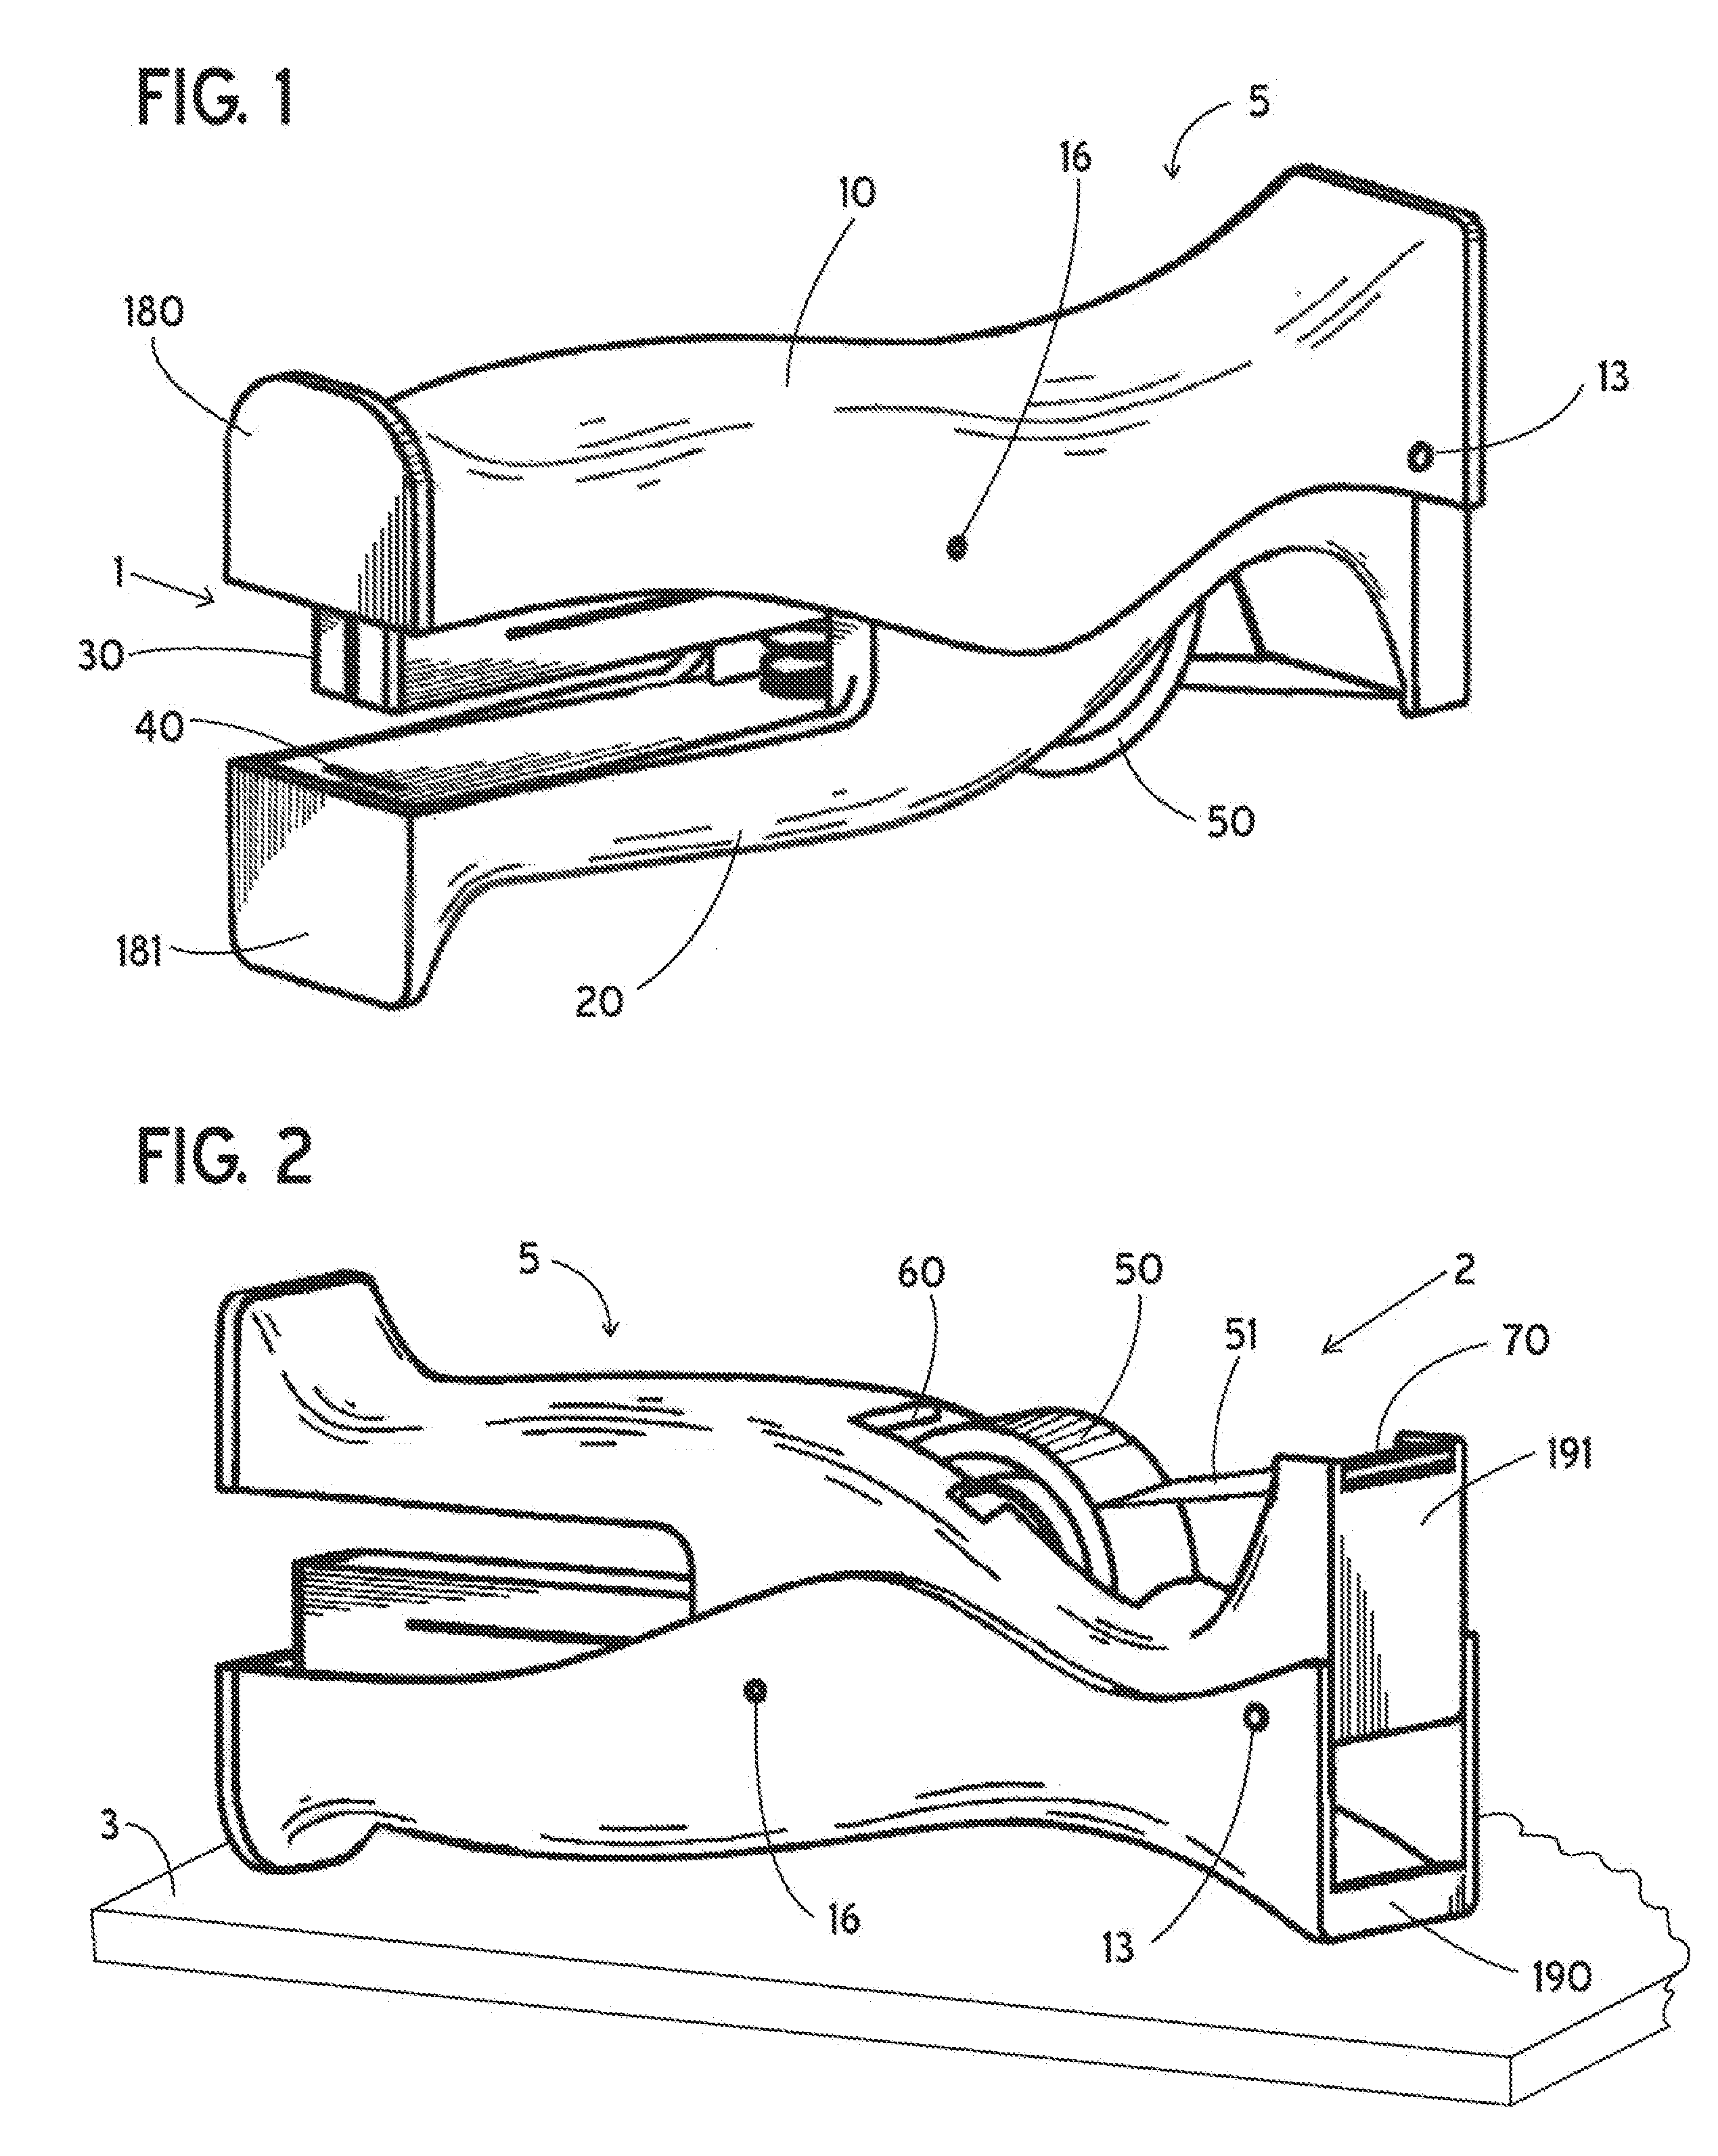 Vertically standing stapler and tape dispensing device